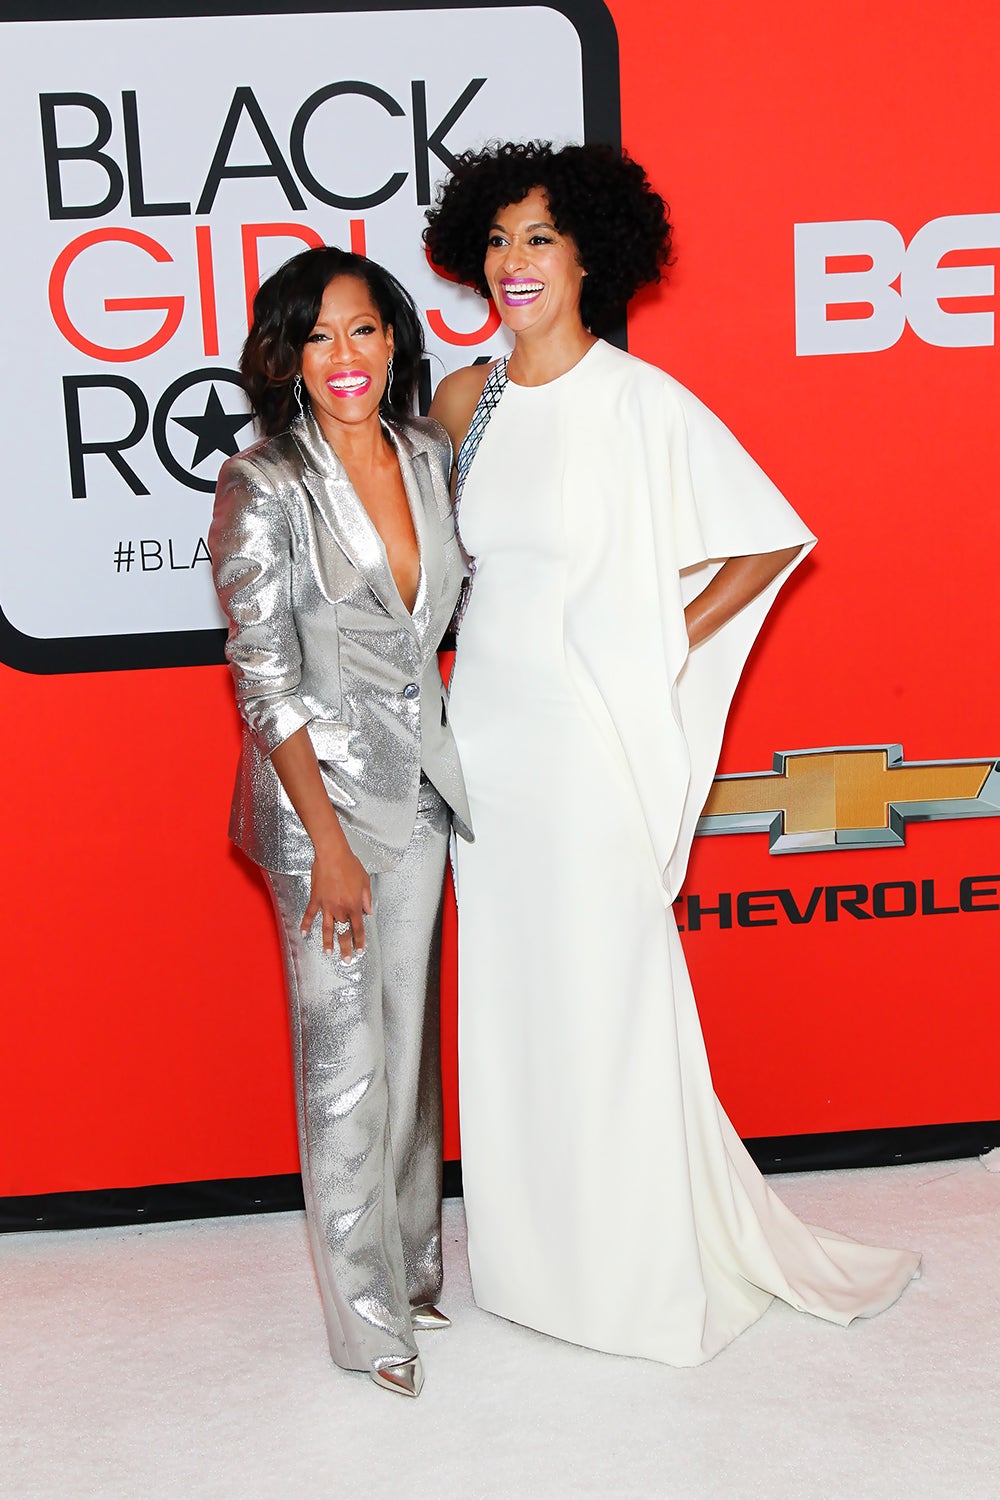 25 Moments We Loved from Black Girls Rock 2015